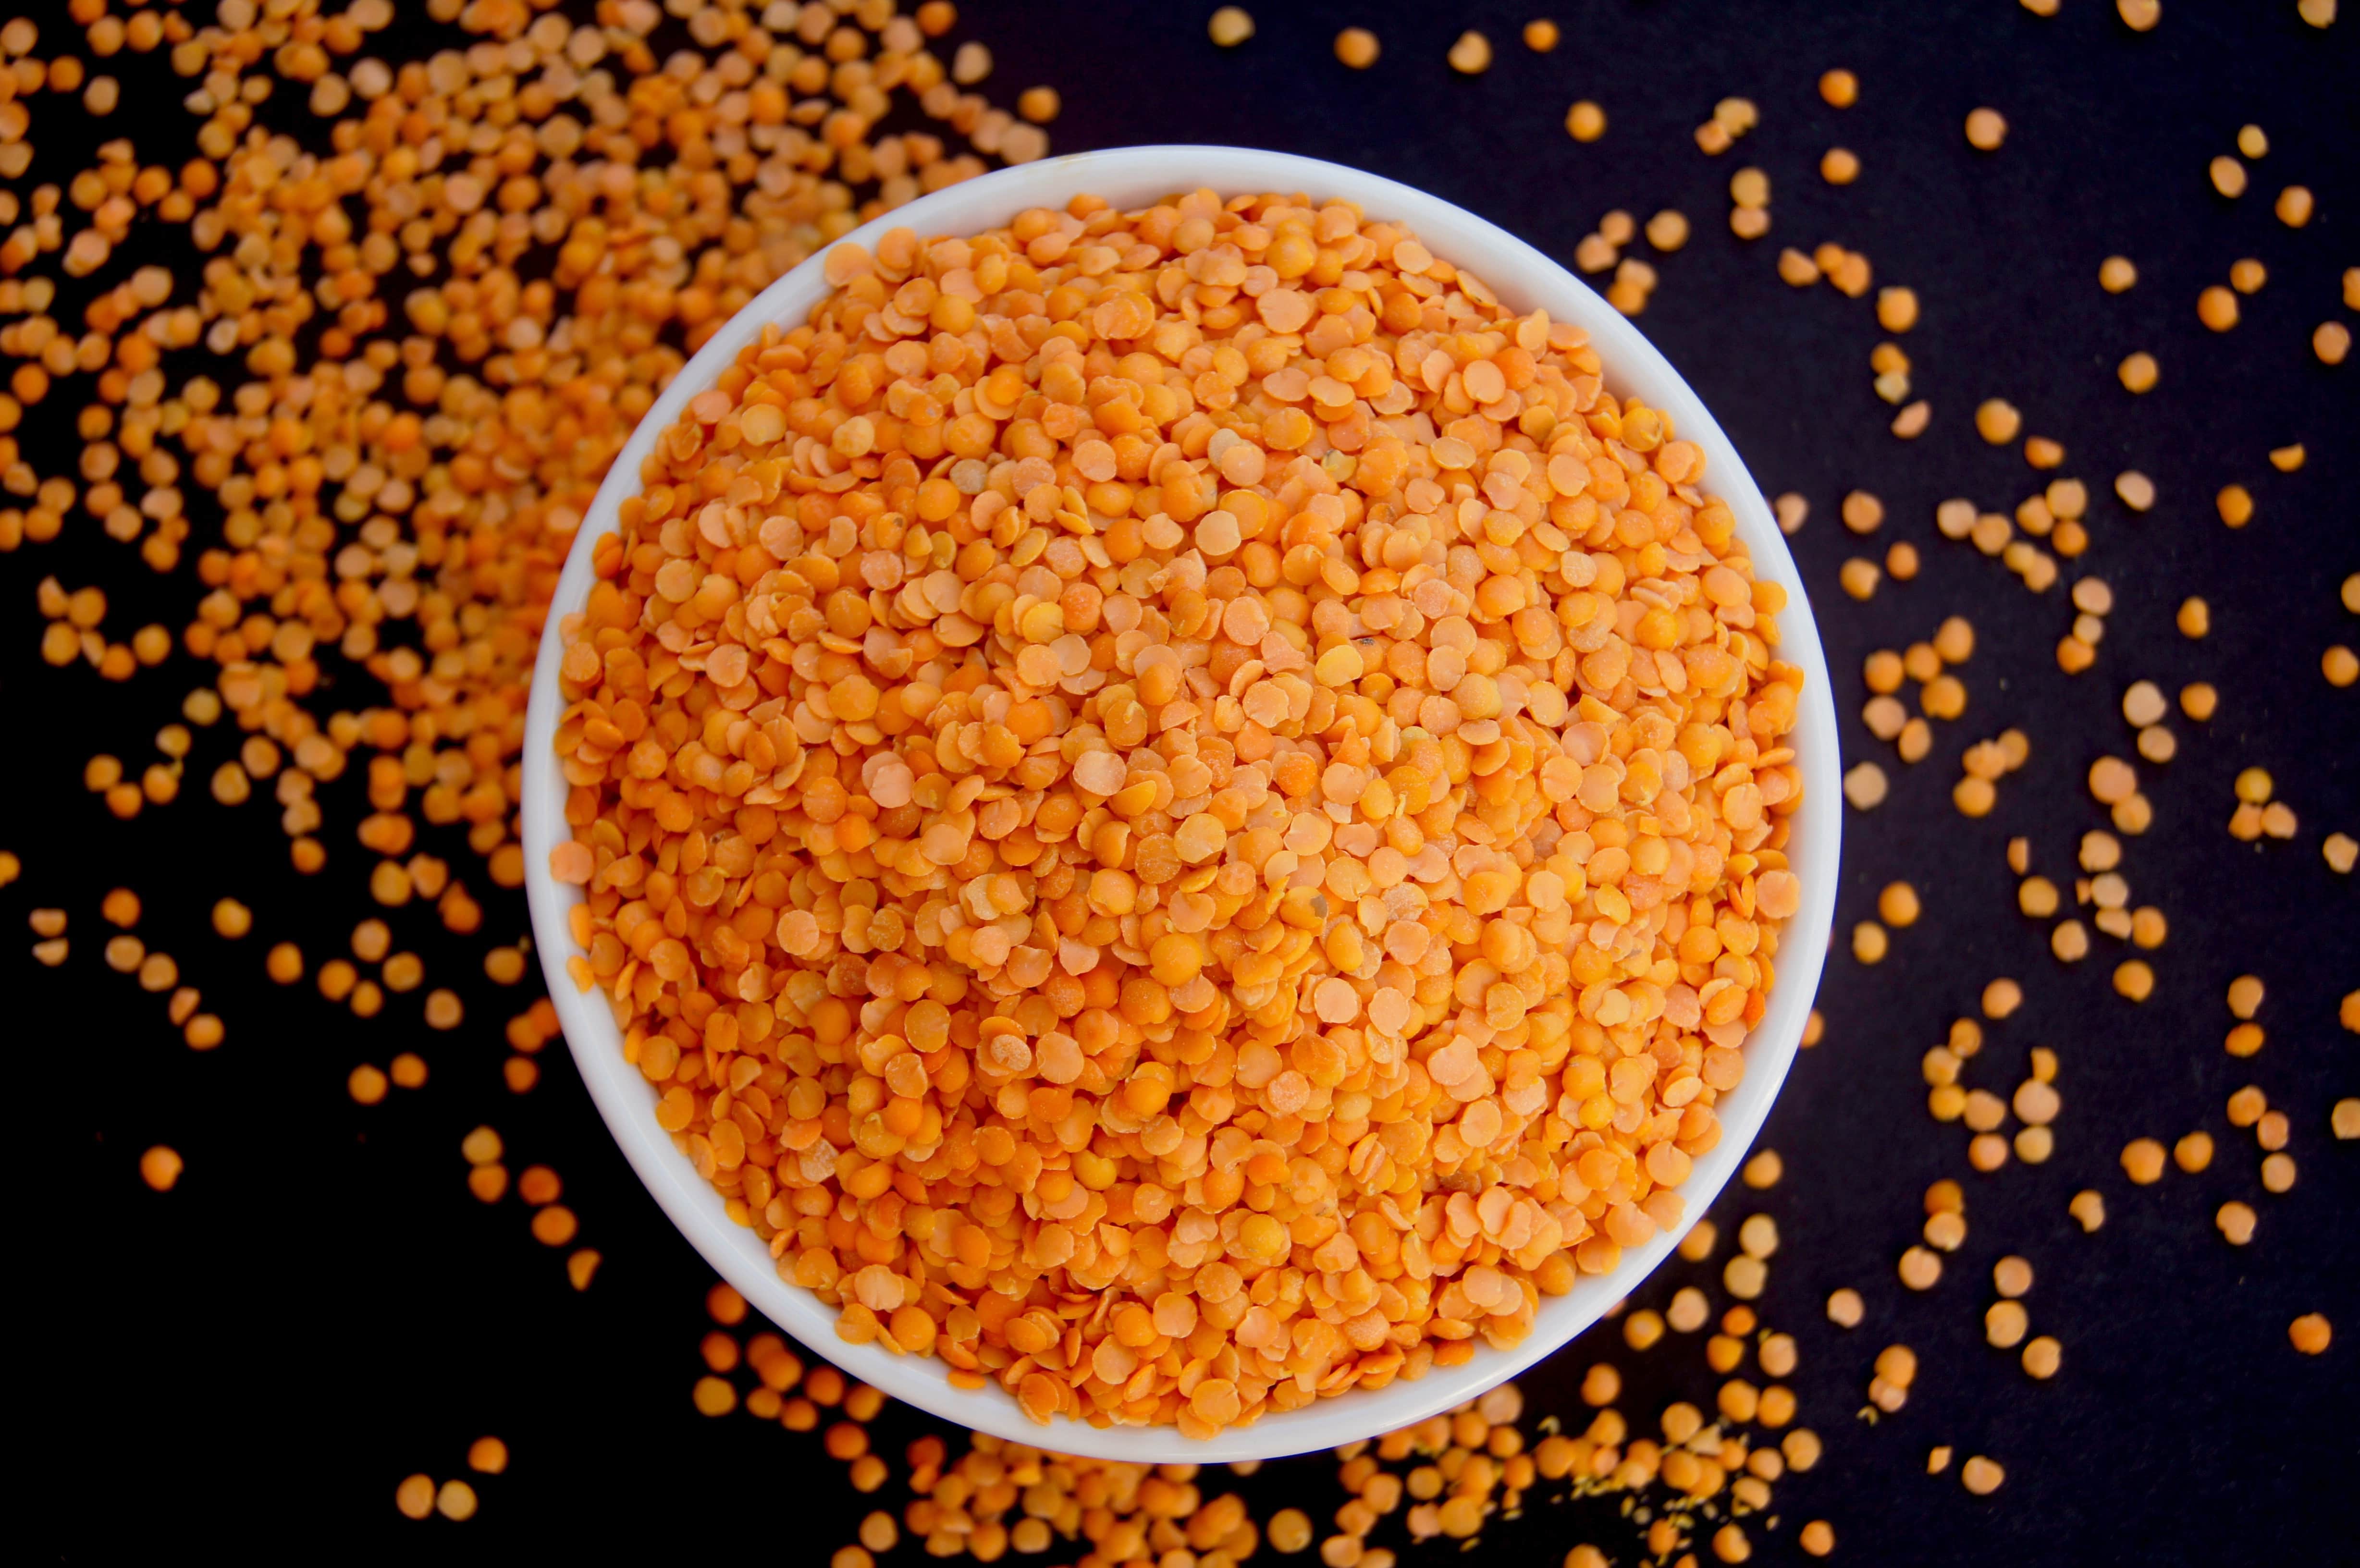 Raw Masoor Dal (red lentils) spilling over in a bowl